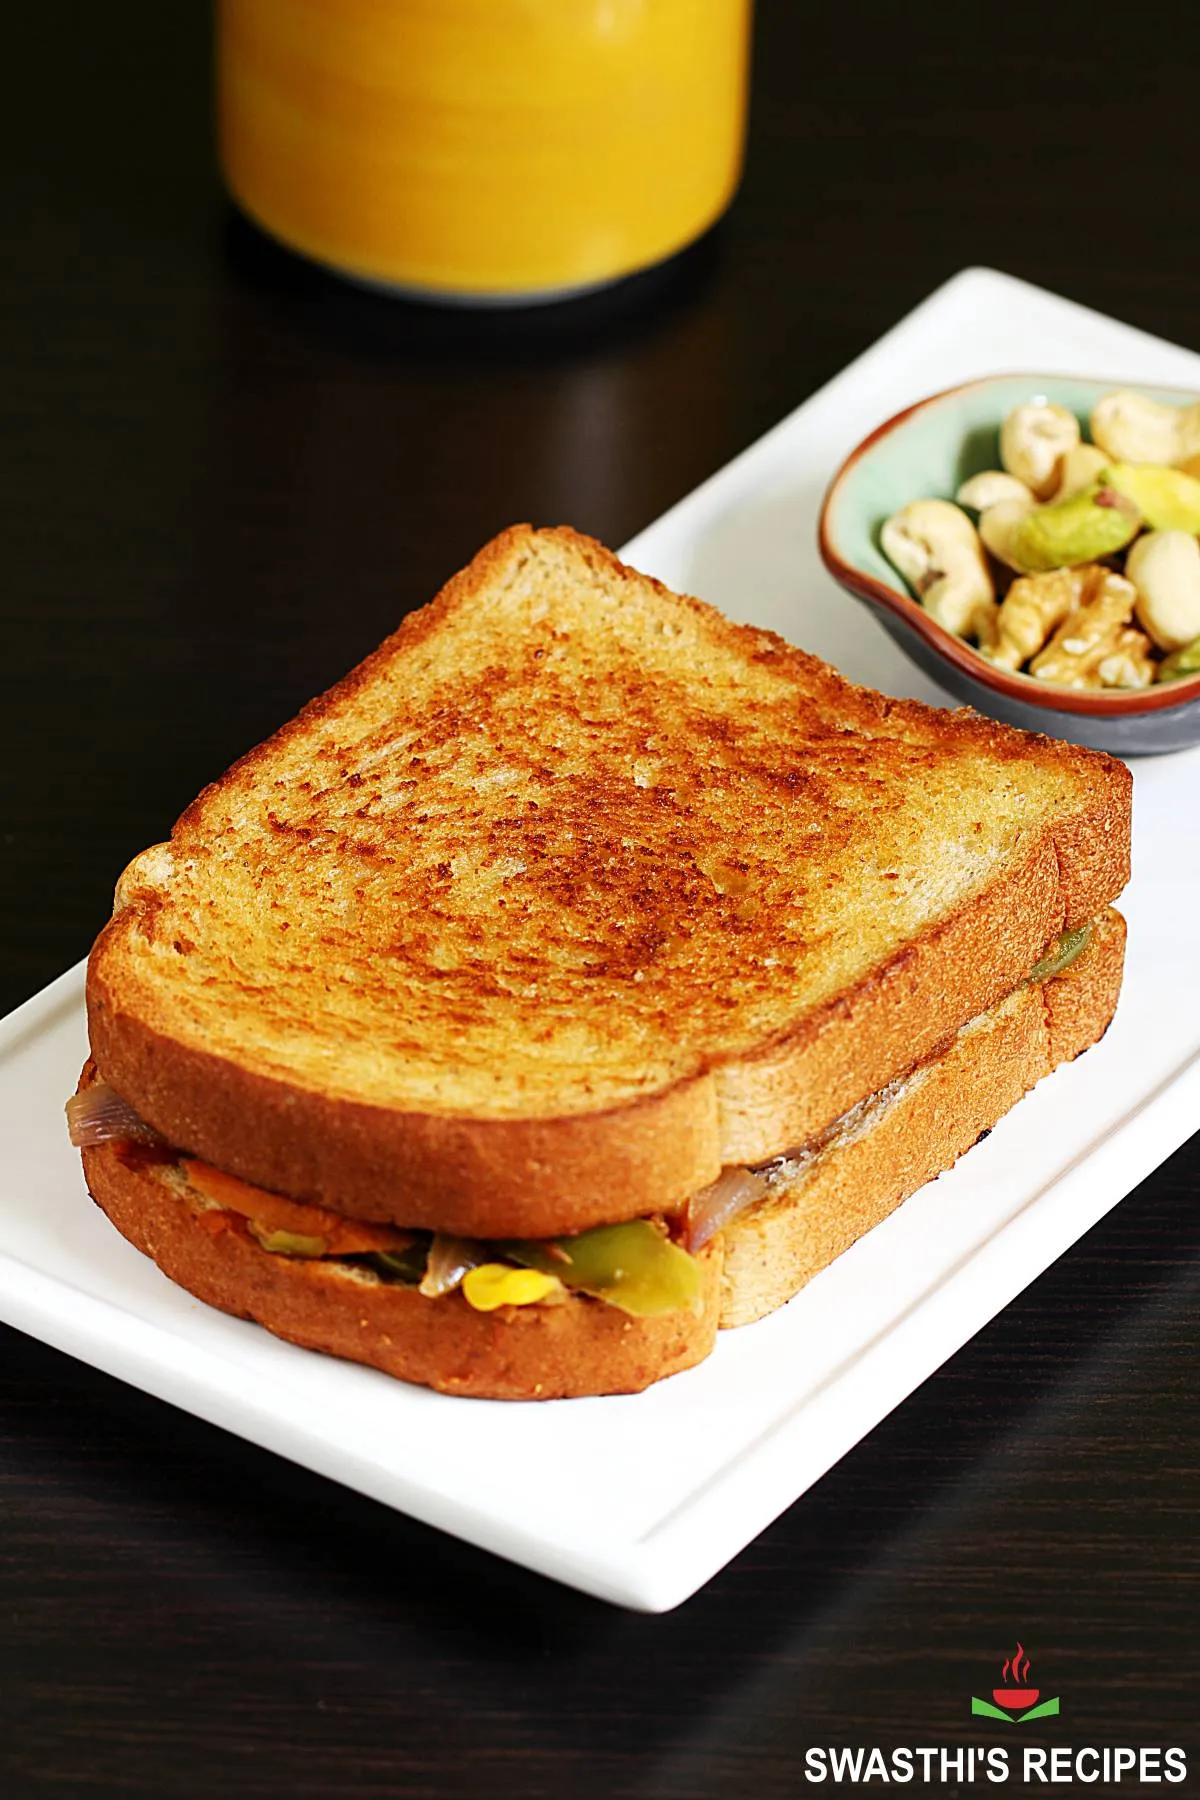 Veg sandwich also known as vegetable sandwich served in a white plate